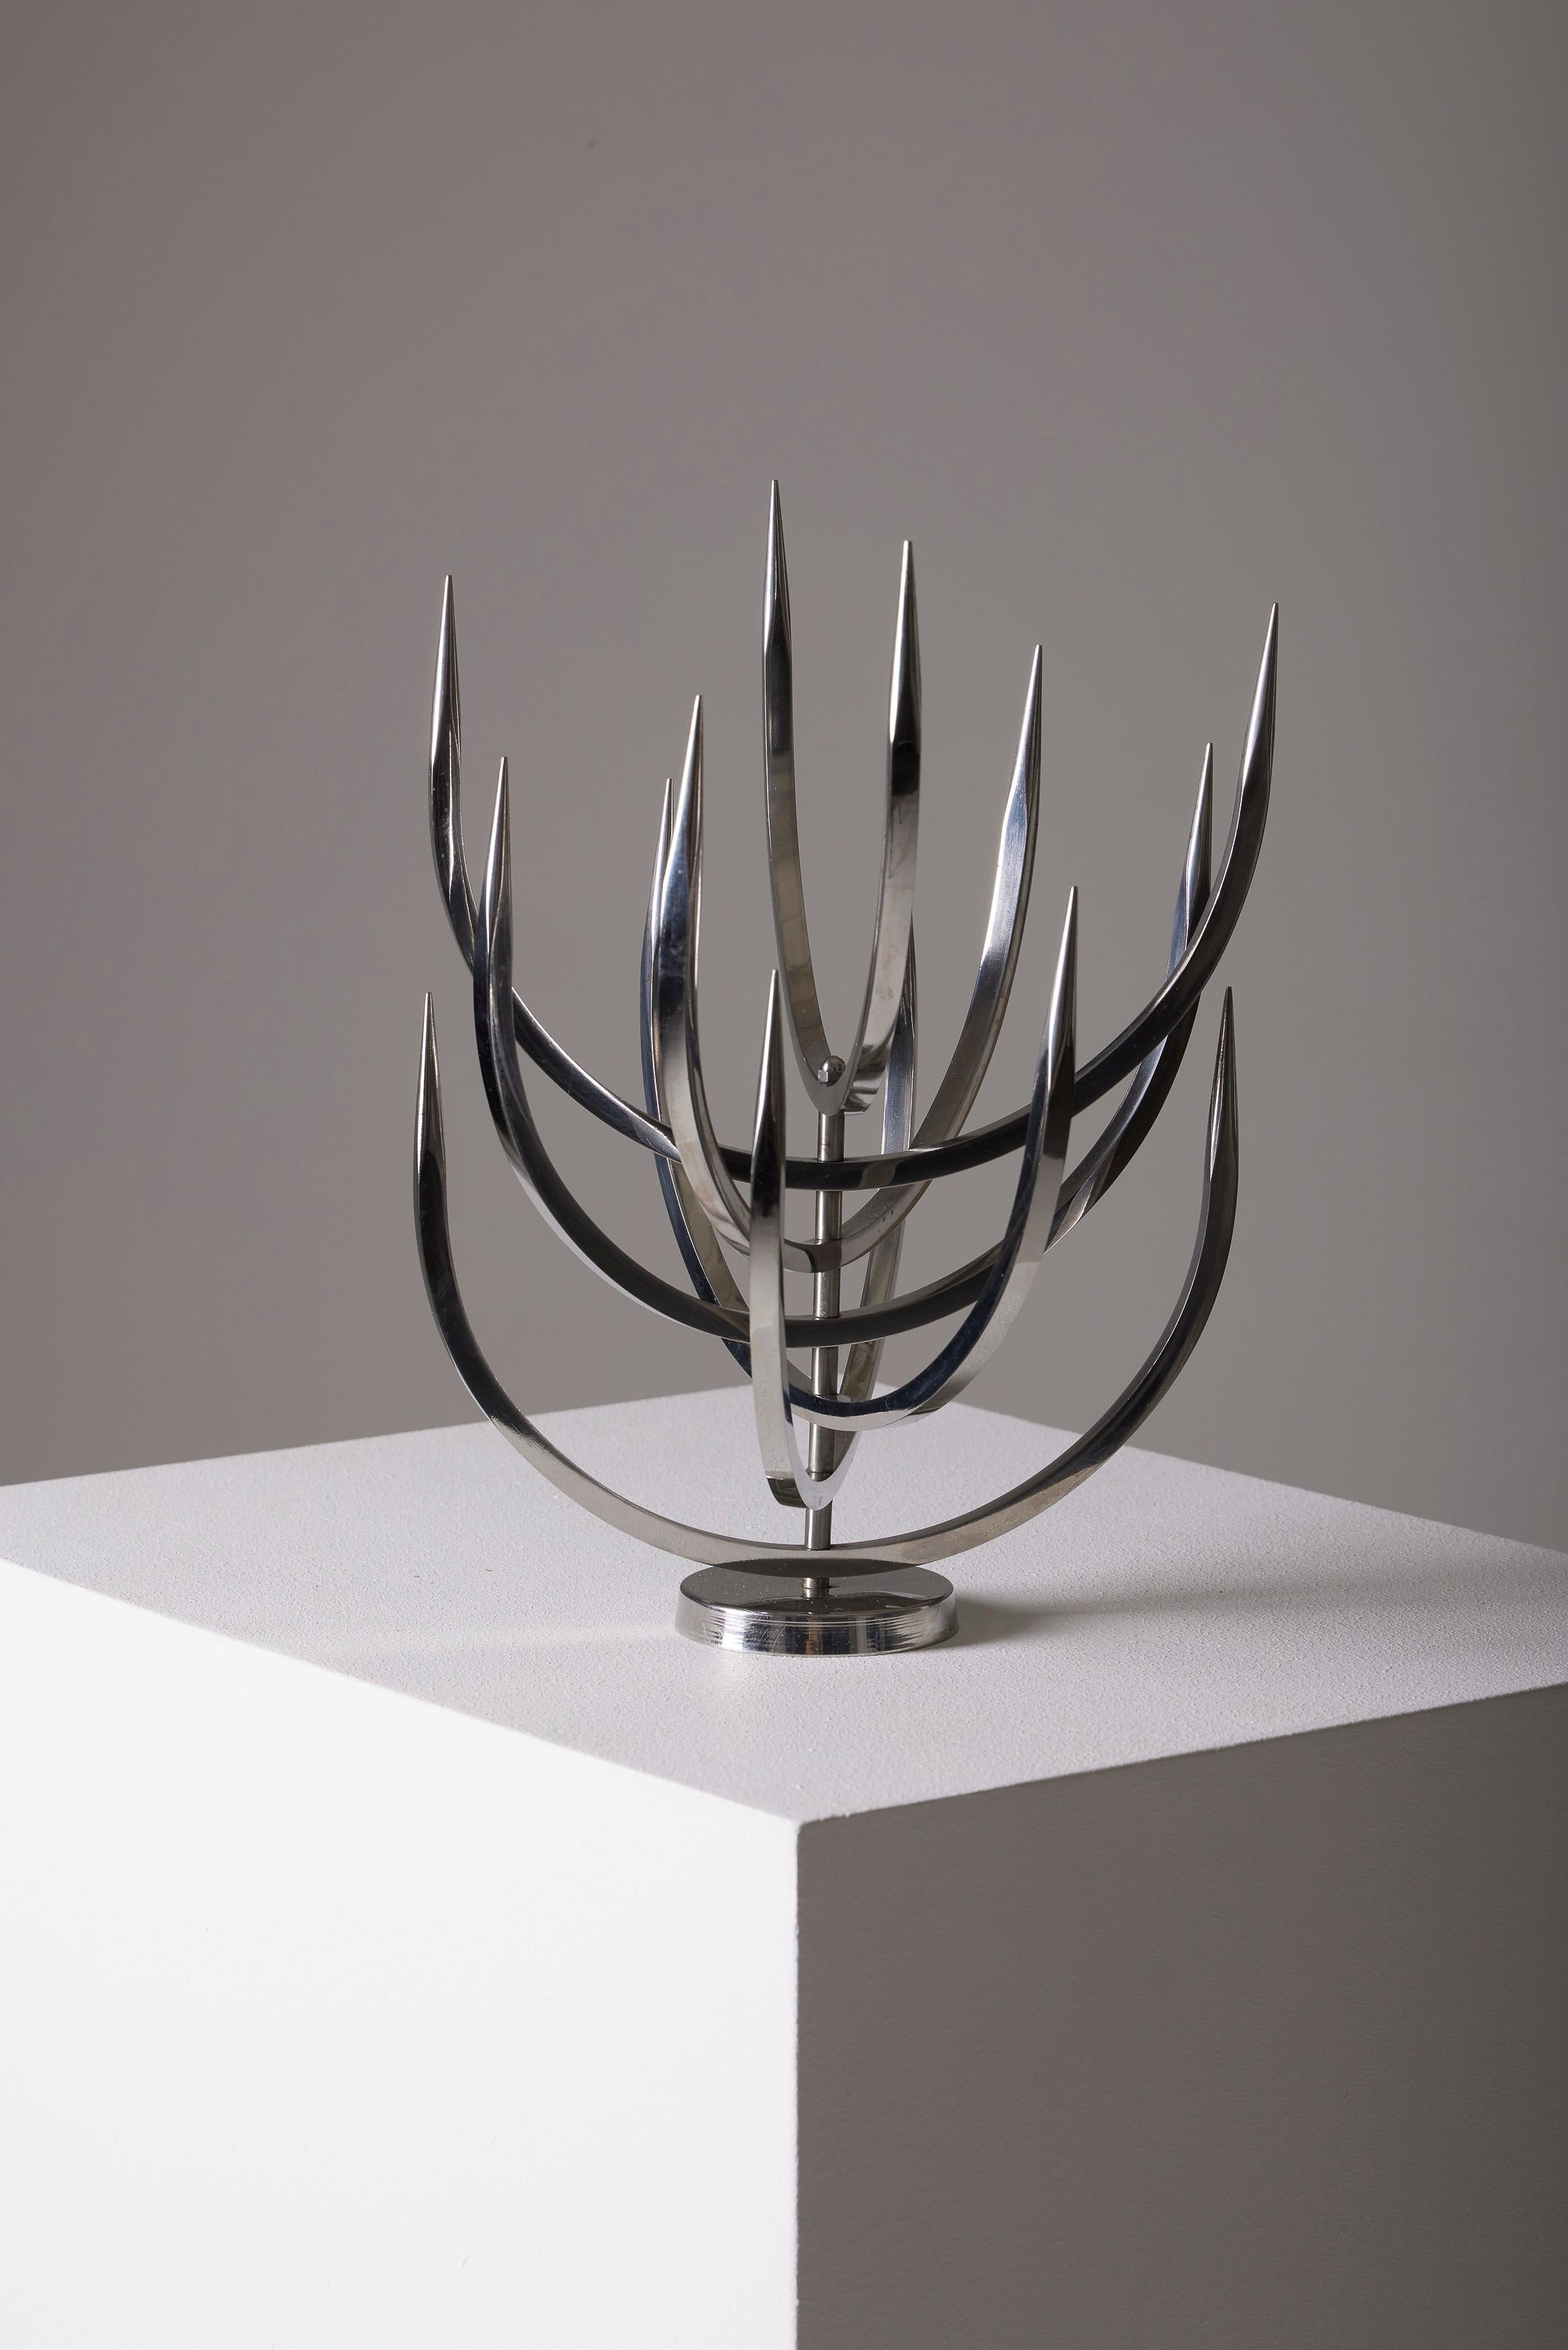 Candlestick or candle tree in polished stainless steel by designer Xavier Feal for Inox Industrie in the 1970s.
LP3158